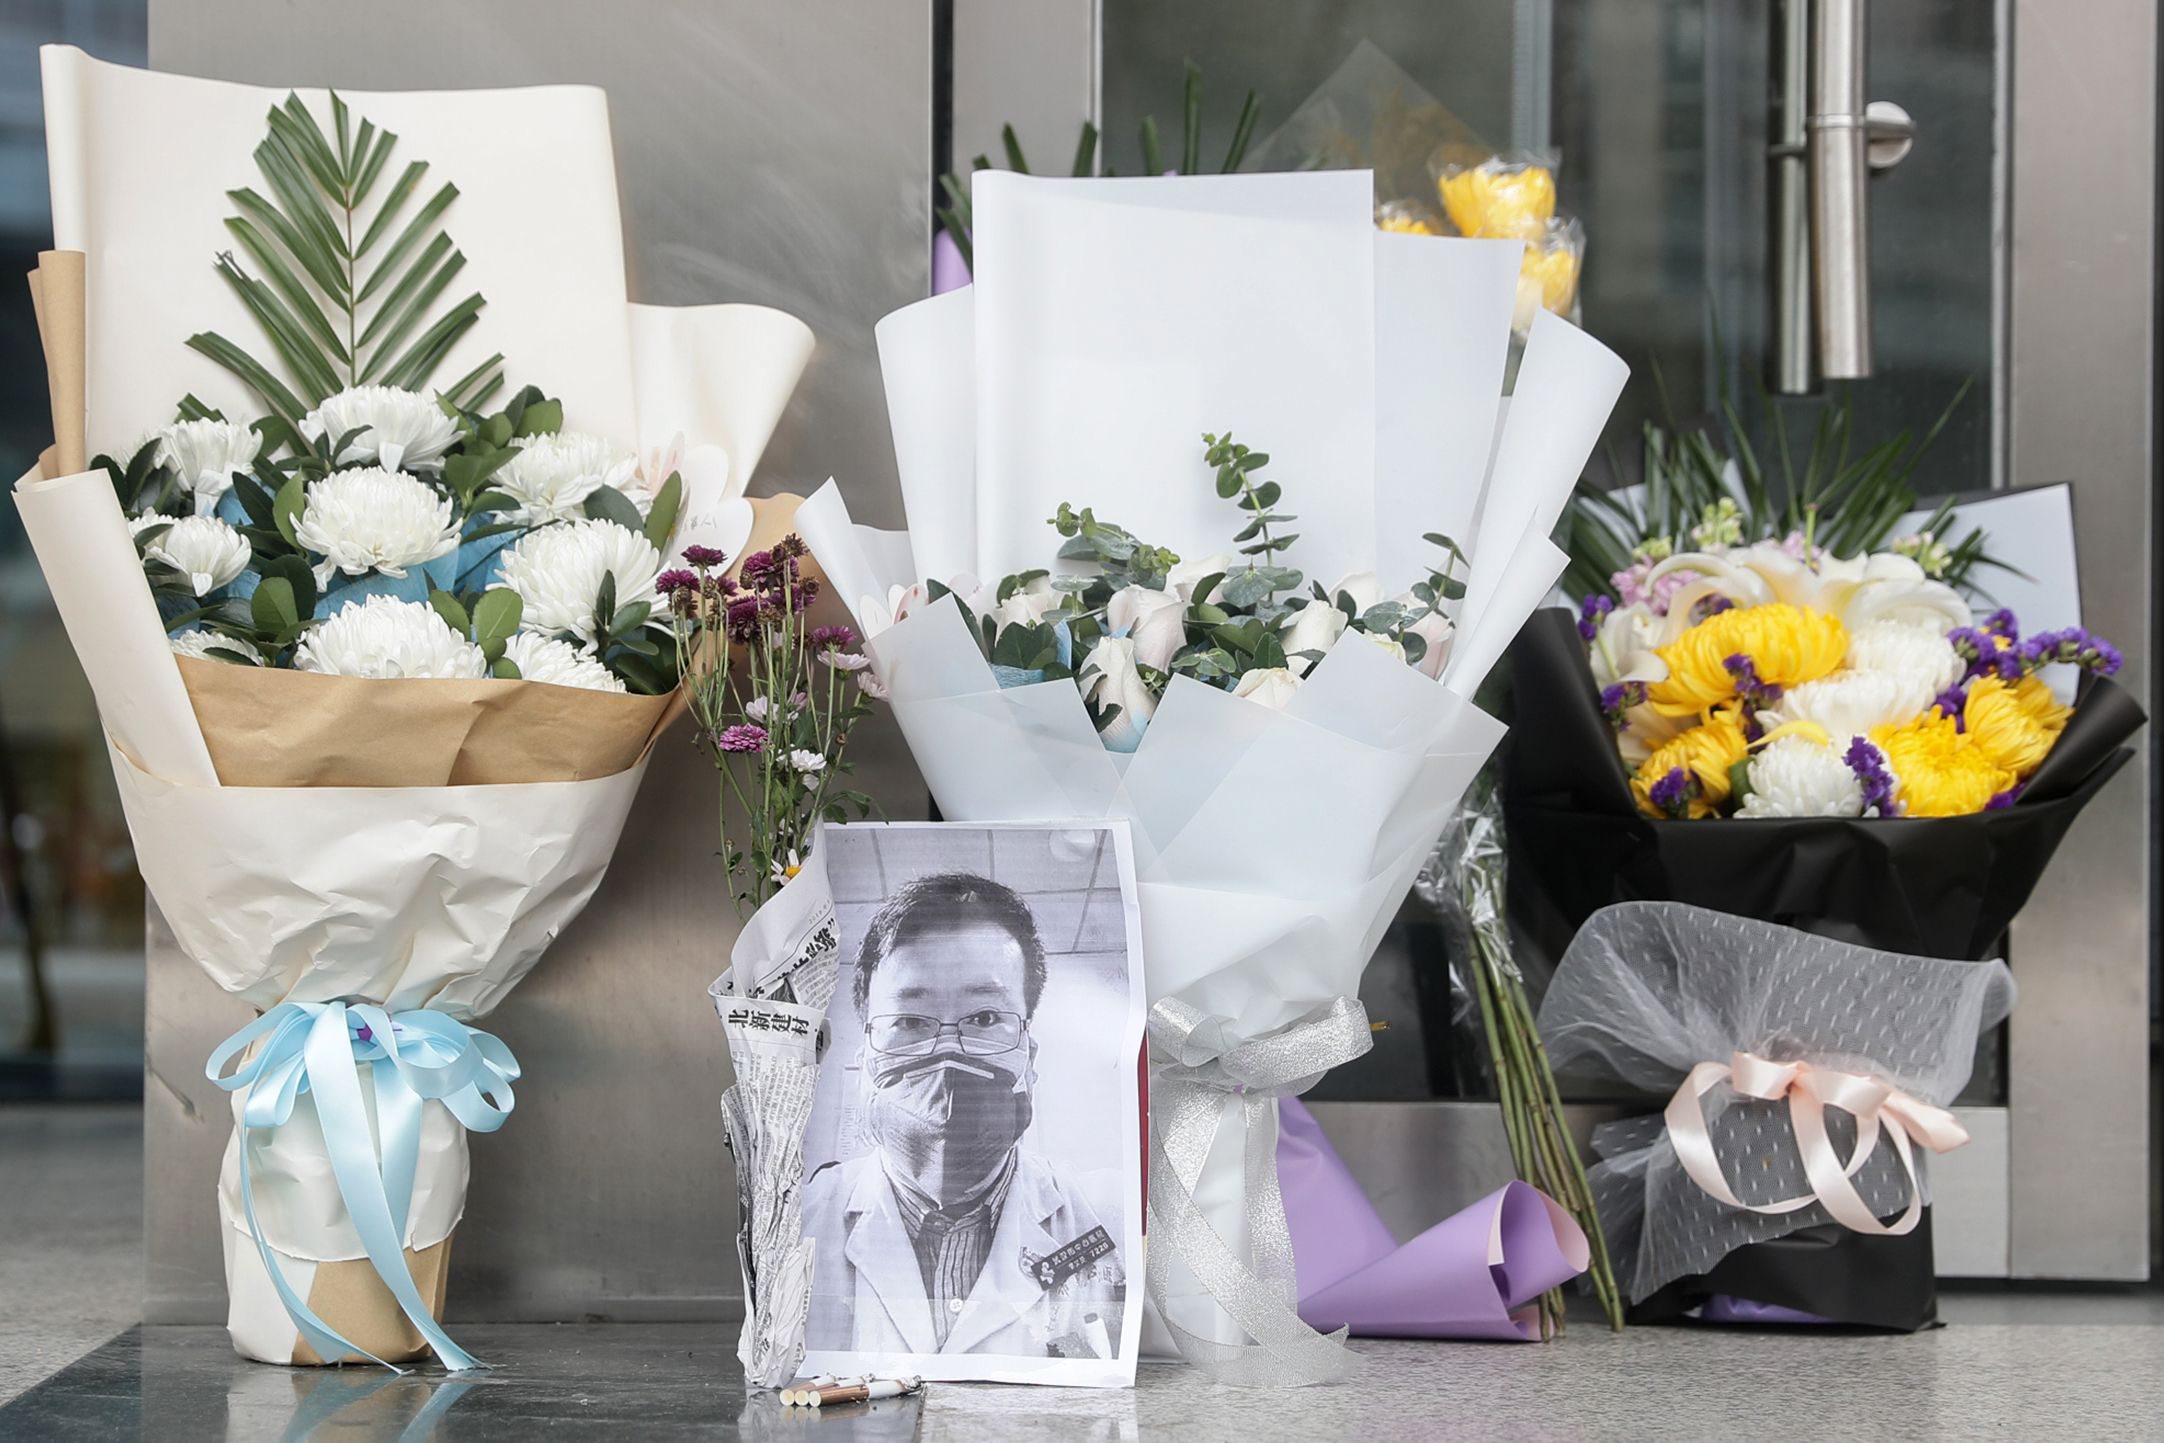 A photo of the late ophthalmologist Li Wenliang is seen with flower bouquets at the Houhu Branch of Wuhan Central Hospital in Wuhan in China's central Hubei province on February 7, 2020. - A Chinese doctor who was punished after raising the alarm about China's new coronavirus died from the pathogen on February 7, sparking an outpouring of grief and anger over a worsening crisis that has now killed more than 630 people. (Photo by STR / AFP) / China OUT